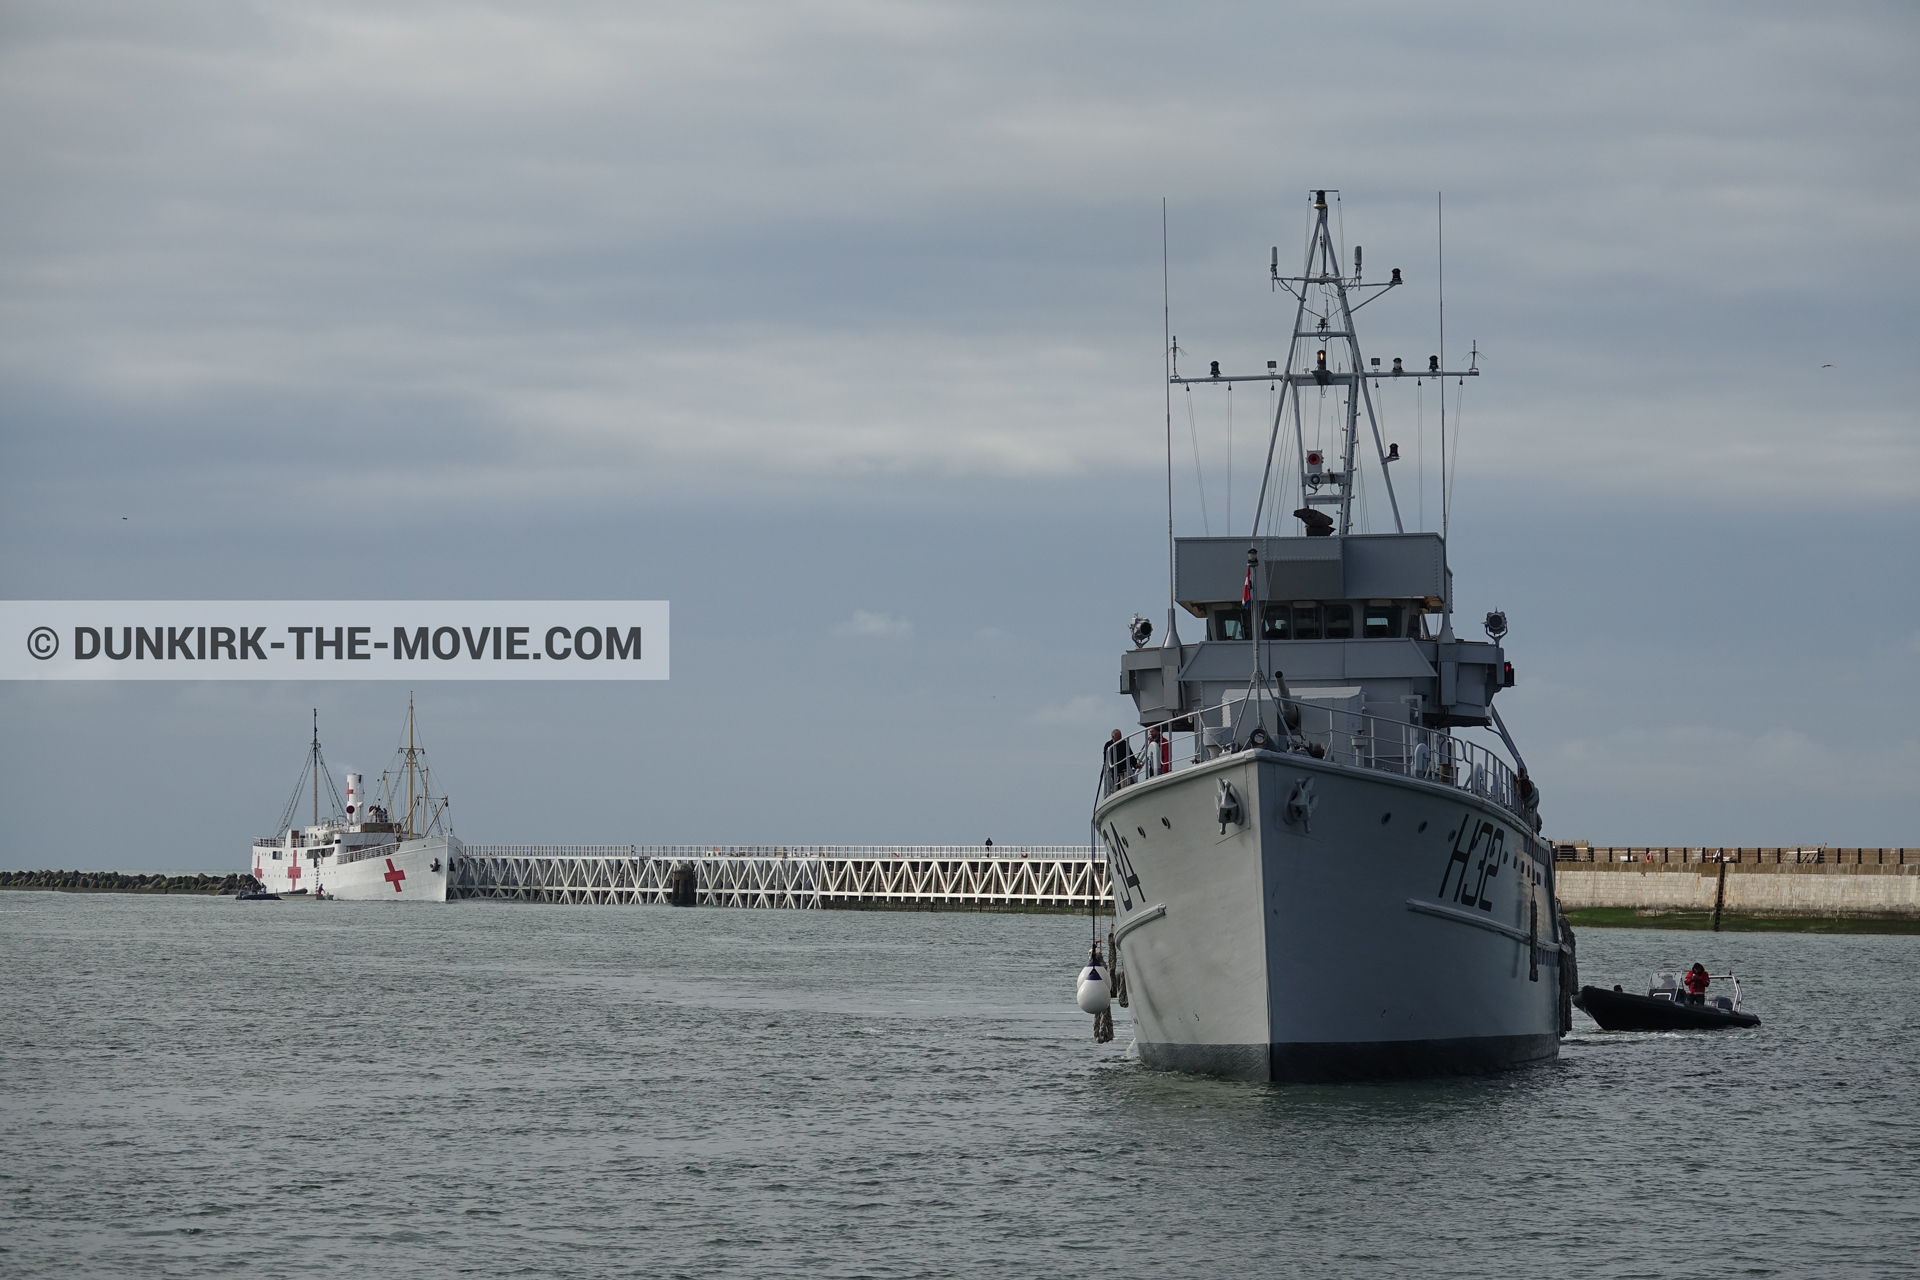 Picture with cloudy sky, F34 - Hr.Ms. Sittard, H32 - Hr.Ms. Sittard, EST pier, calm sea, M/S Rogaland,  from behind the scene of the Dunkirk movie by Nolan